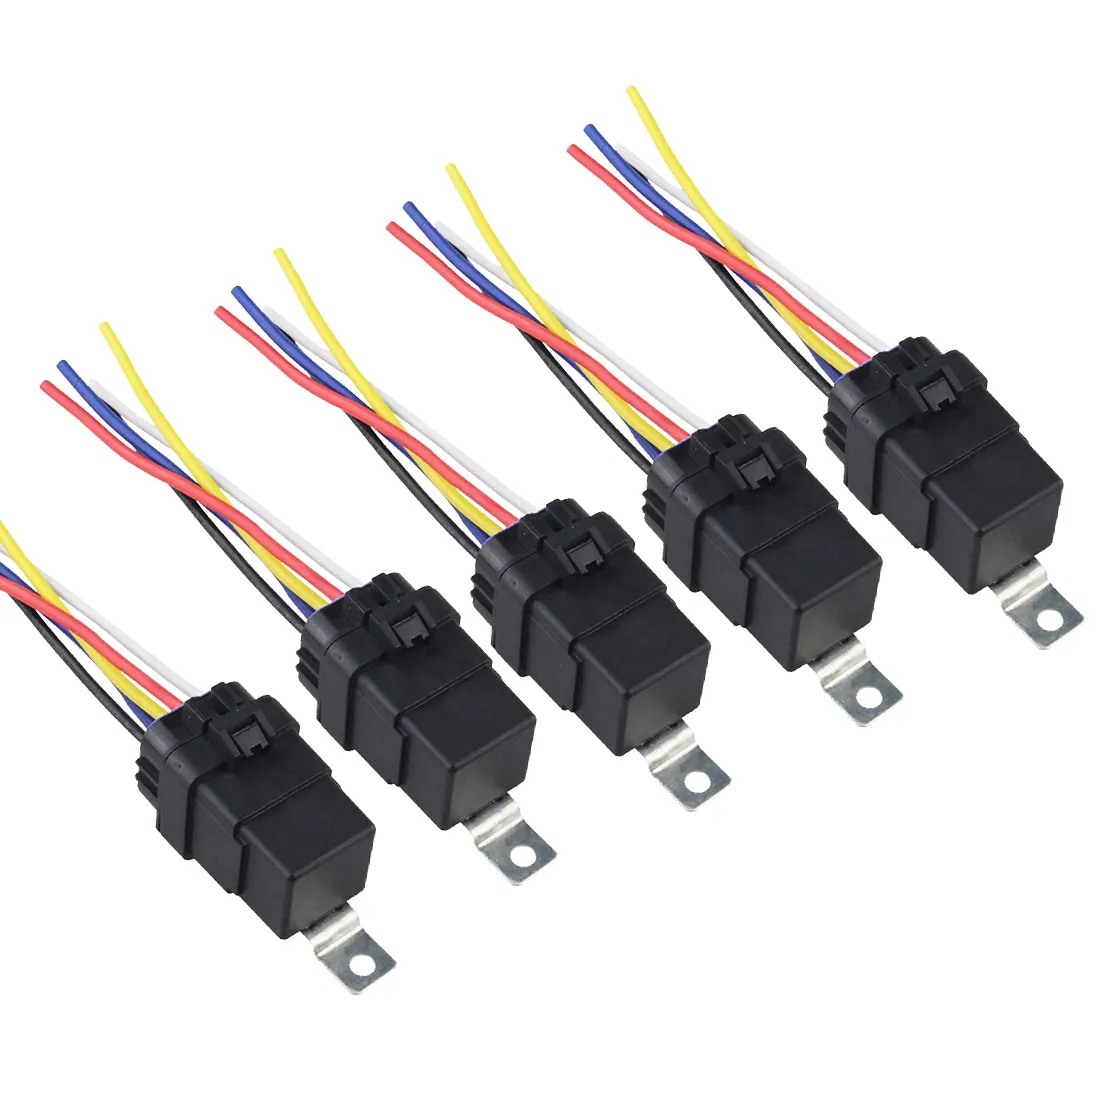 High quality mini auto relay 12v/40A RELAY 5PIN car relay socket wire harness